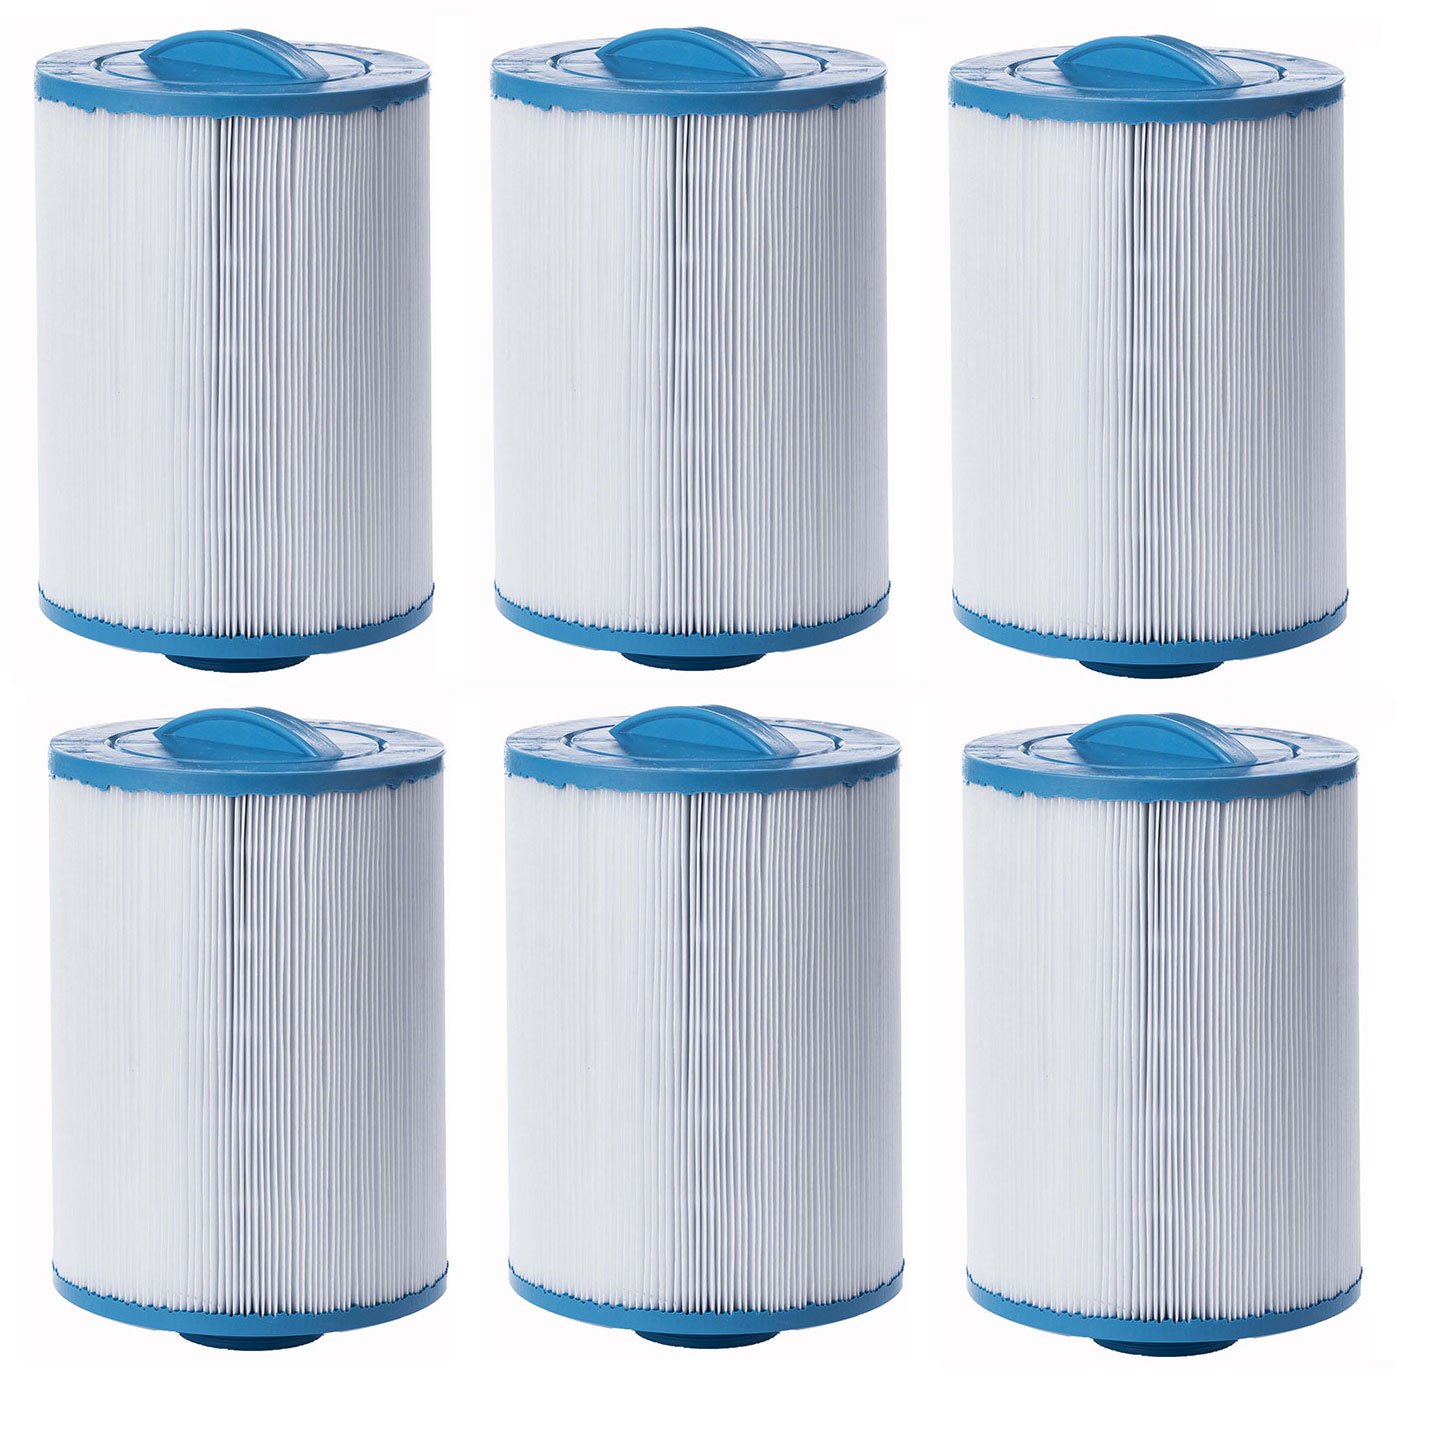 ClearChoice Replacement Pool & Spa Filter for Unicel 6CH-352, 6-pack